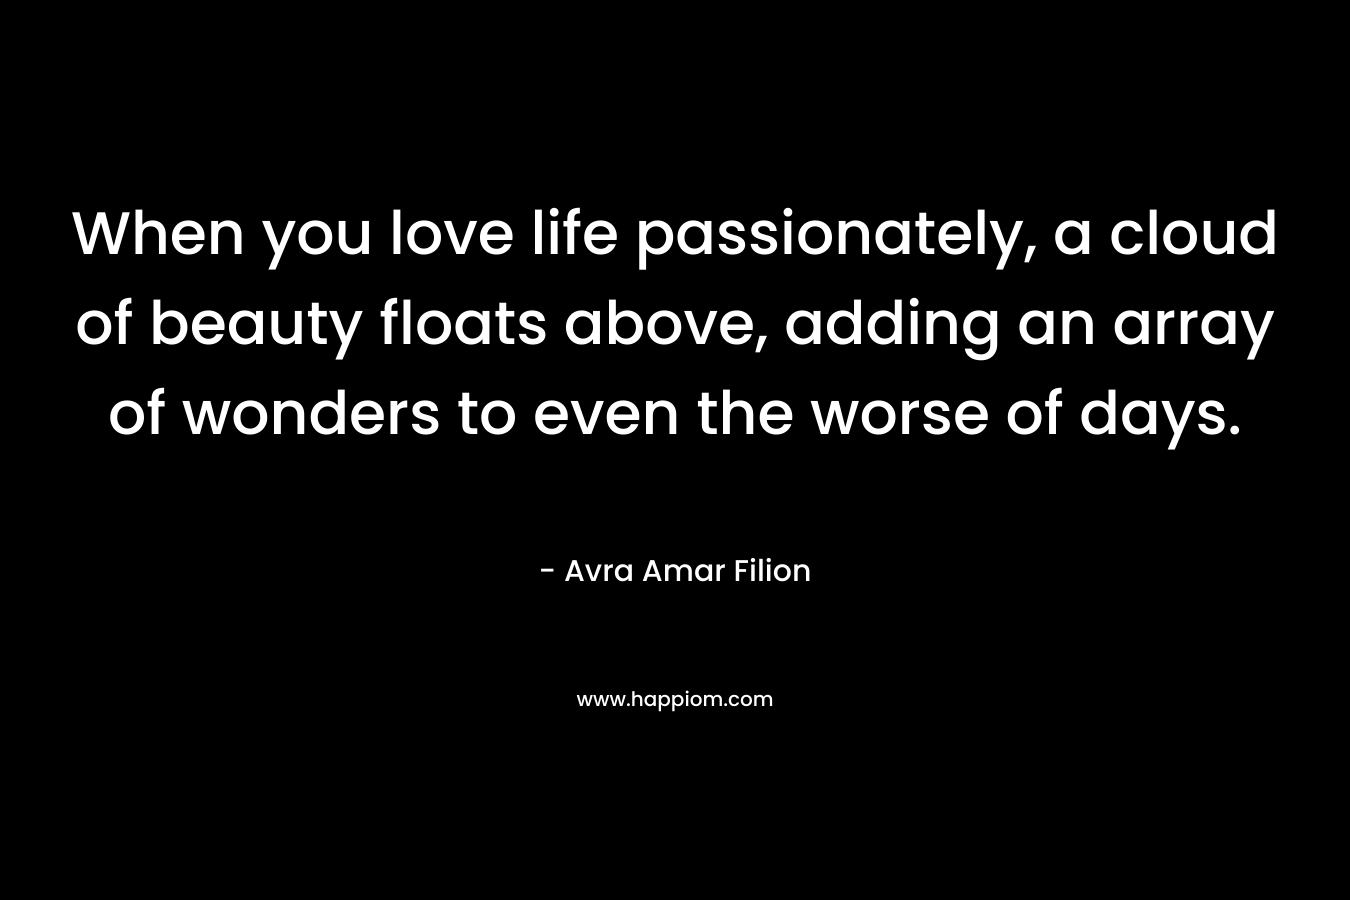 When you love life passionately, a cloud of beauty floats above, adding an array of wonders to even the worse of days. – Avra Amar Filion